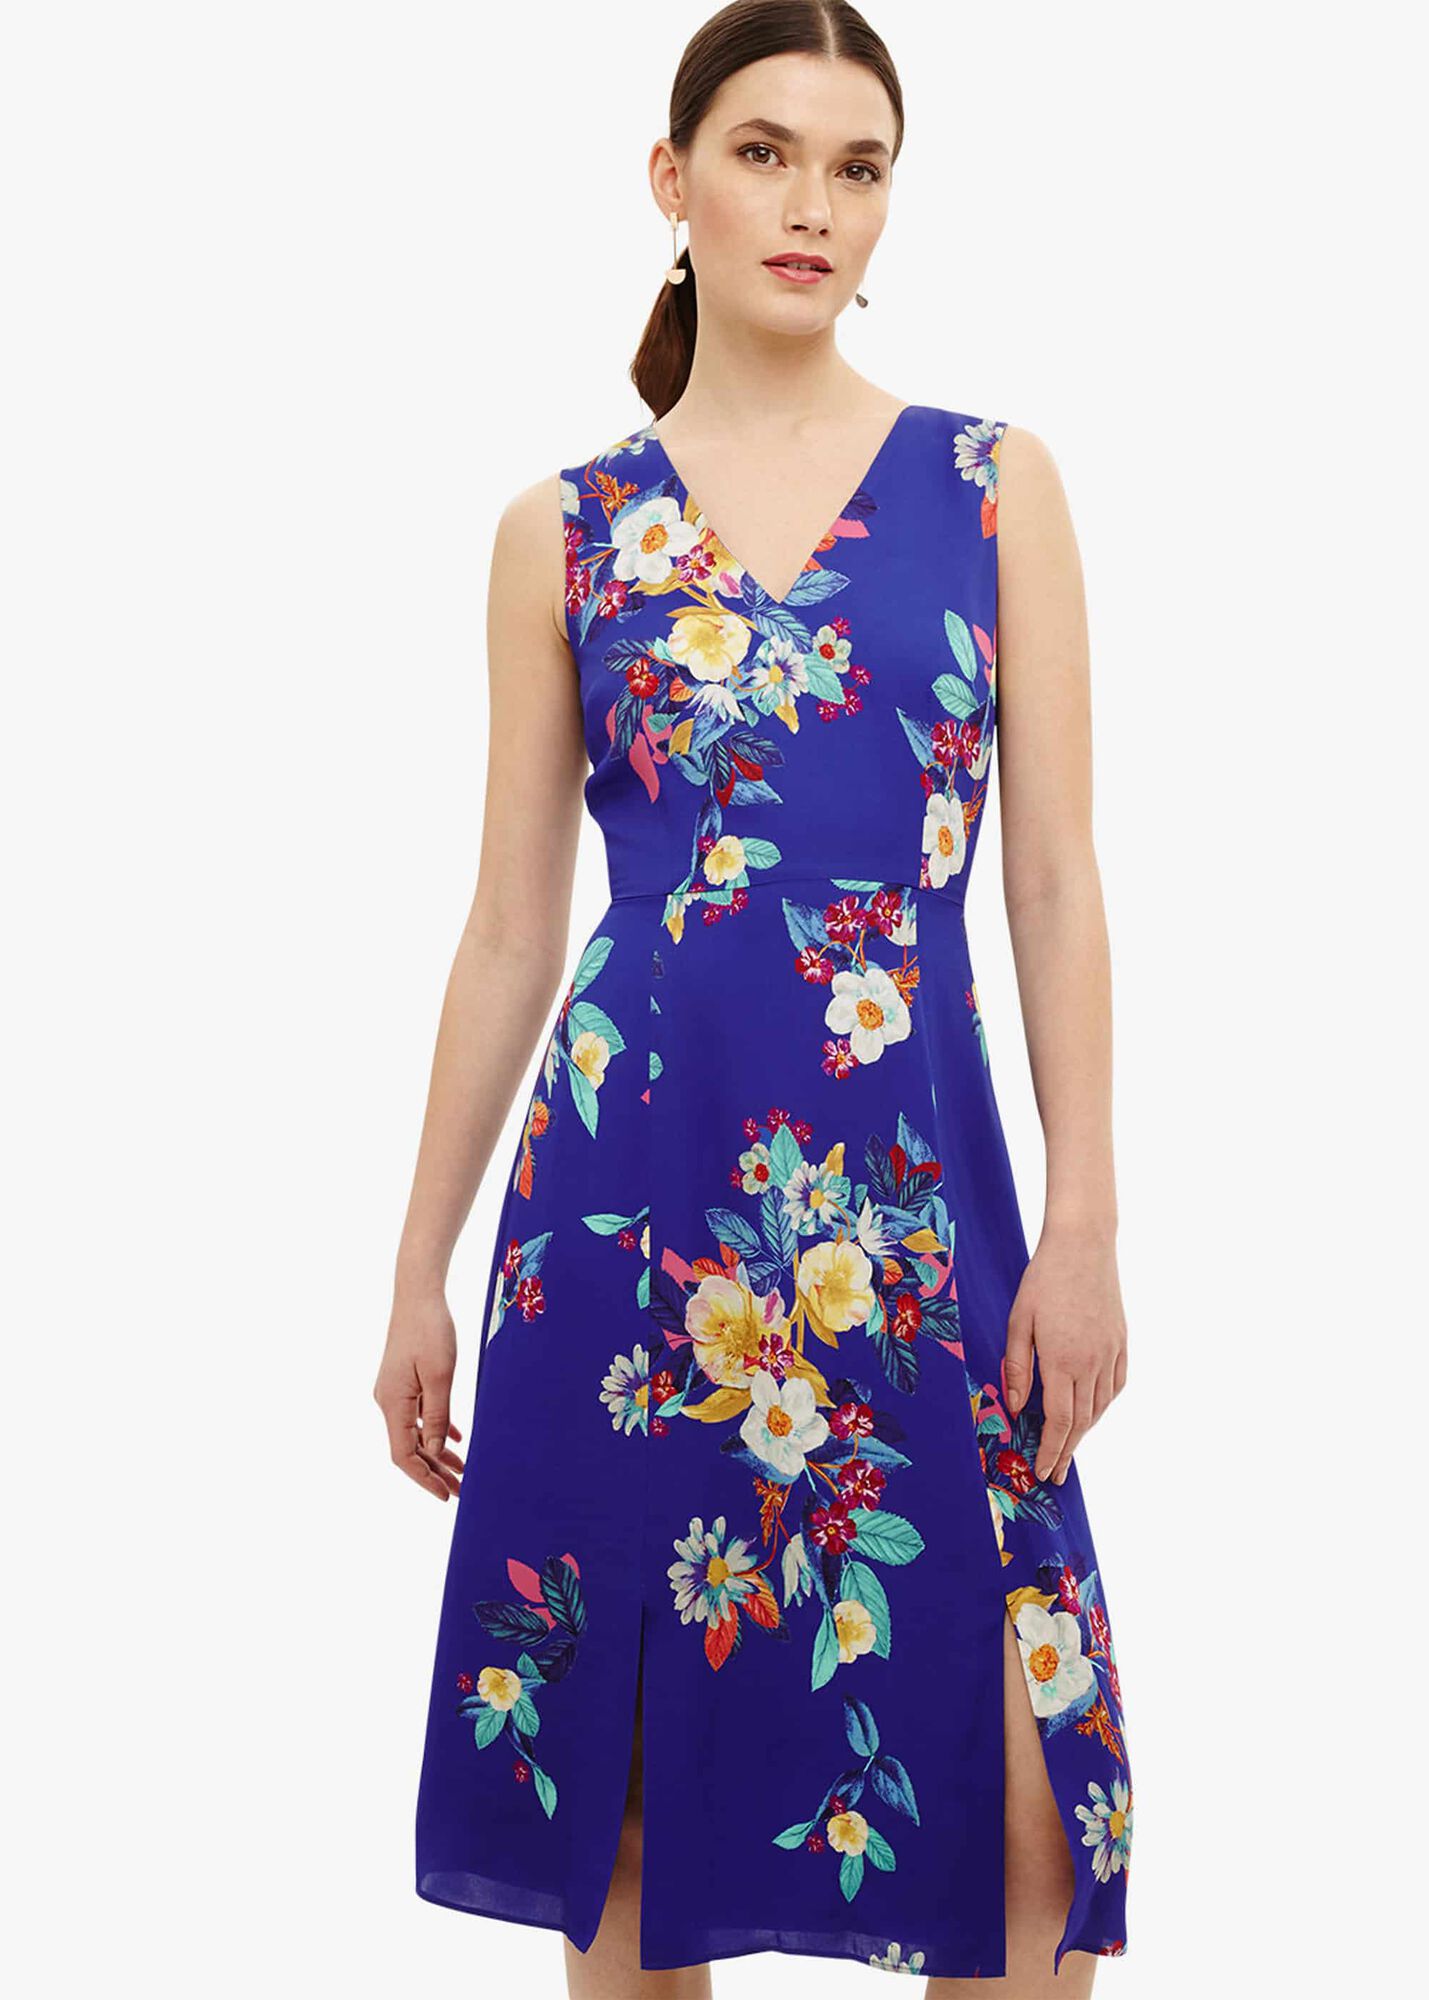 Bellissa Floral Dress | Phase Eight | Phase Eight